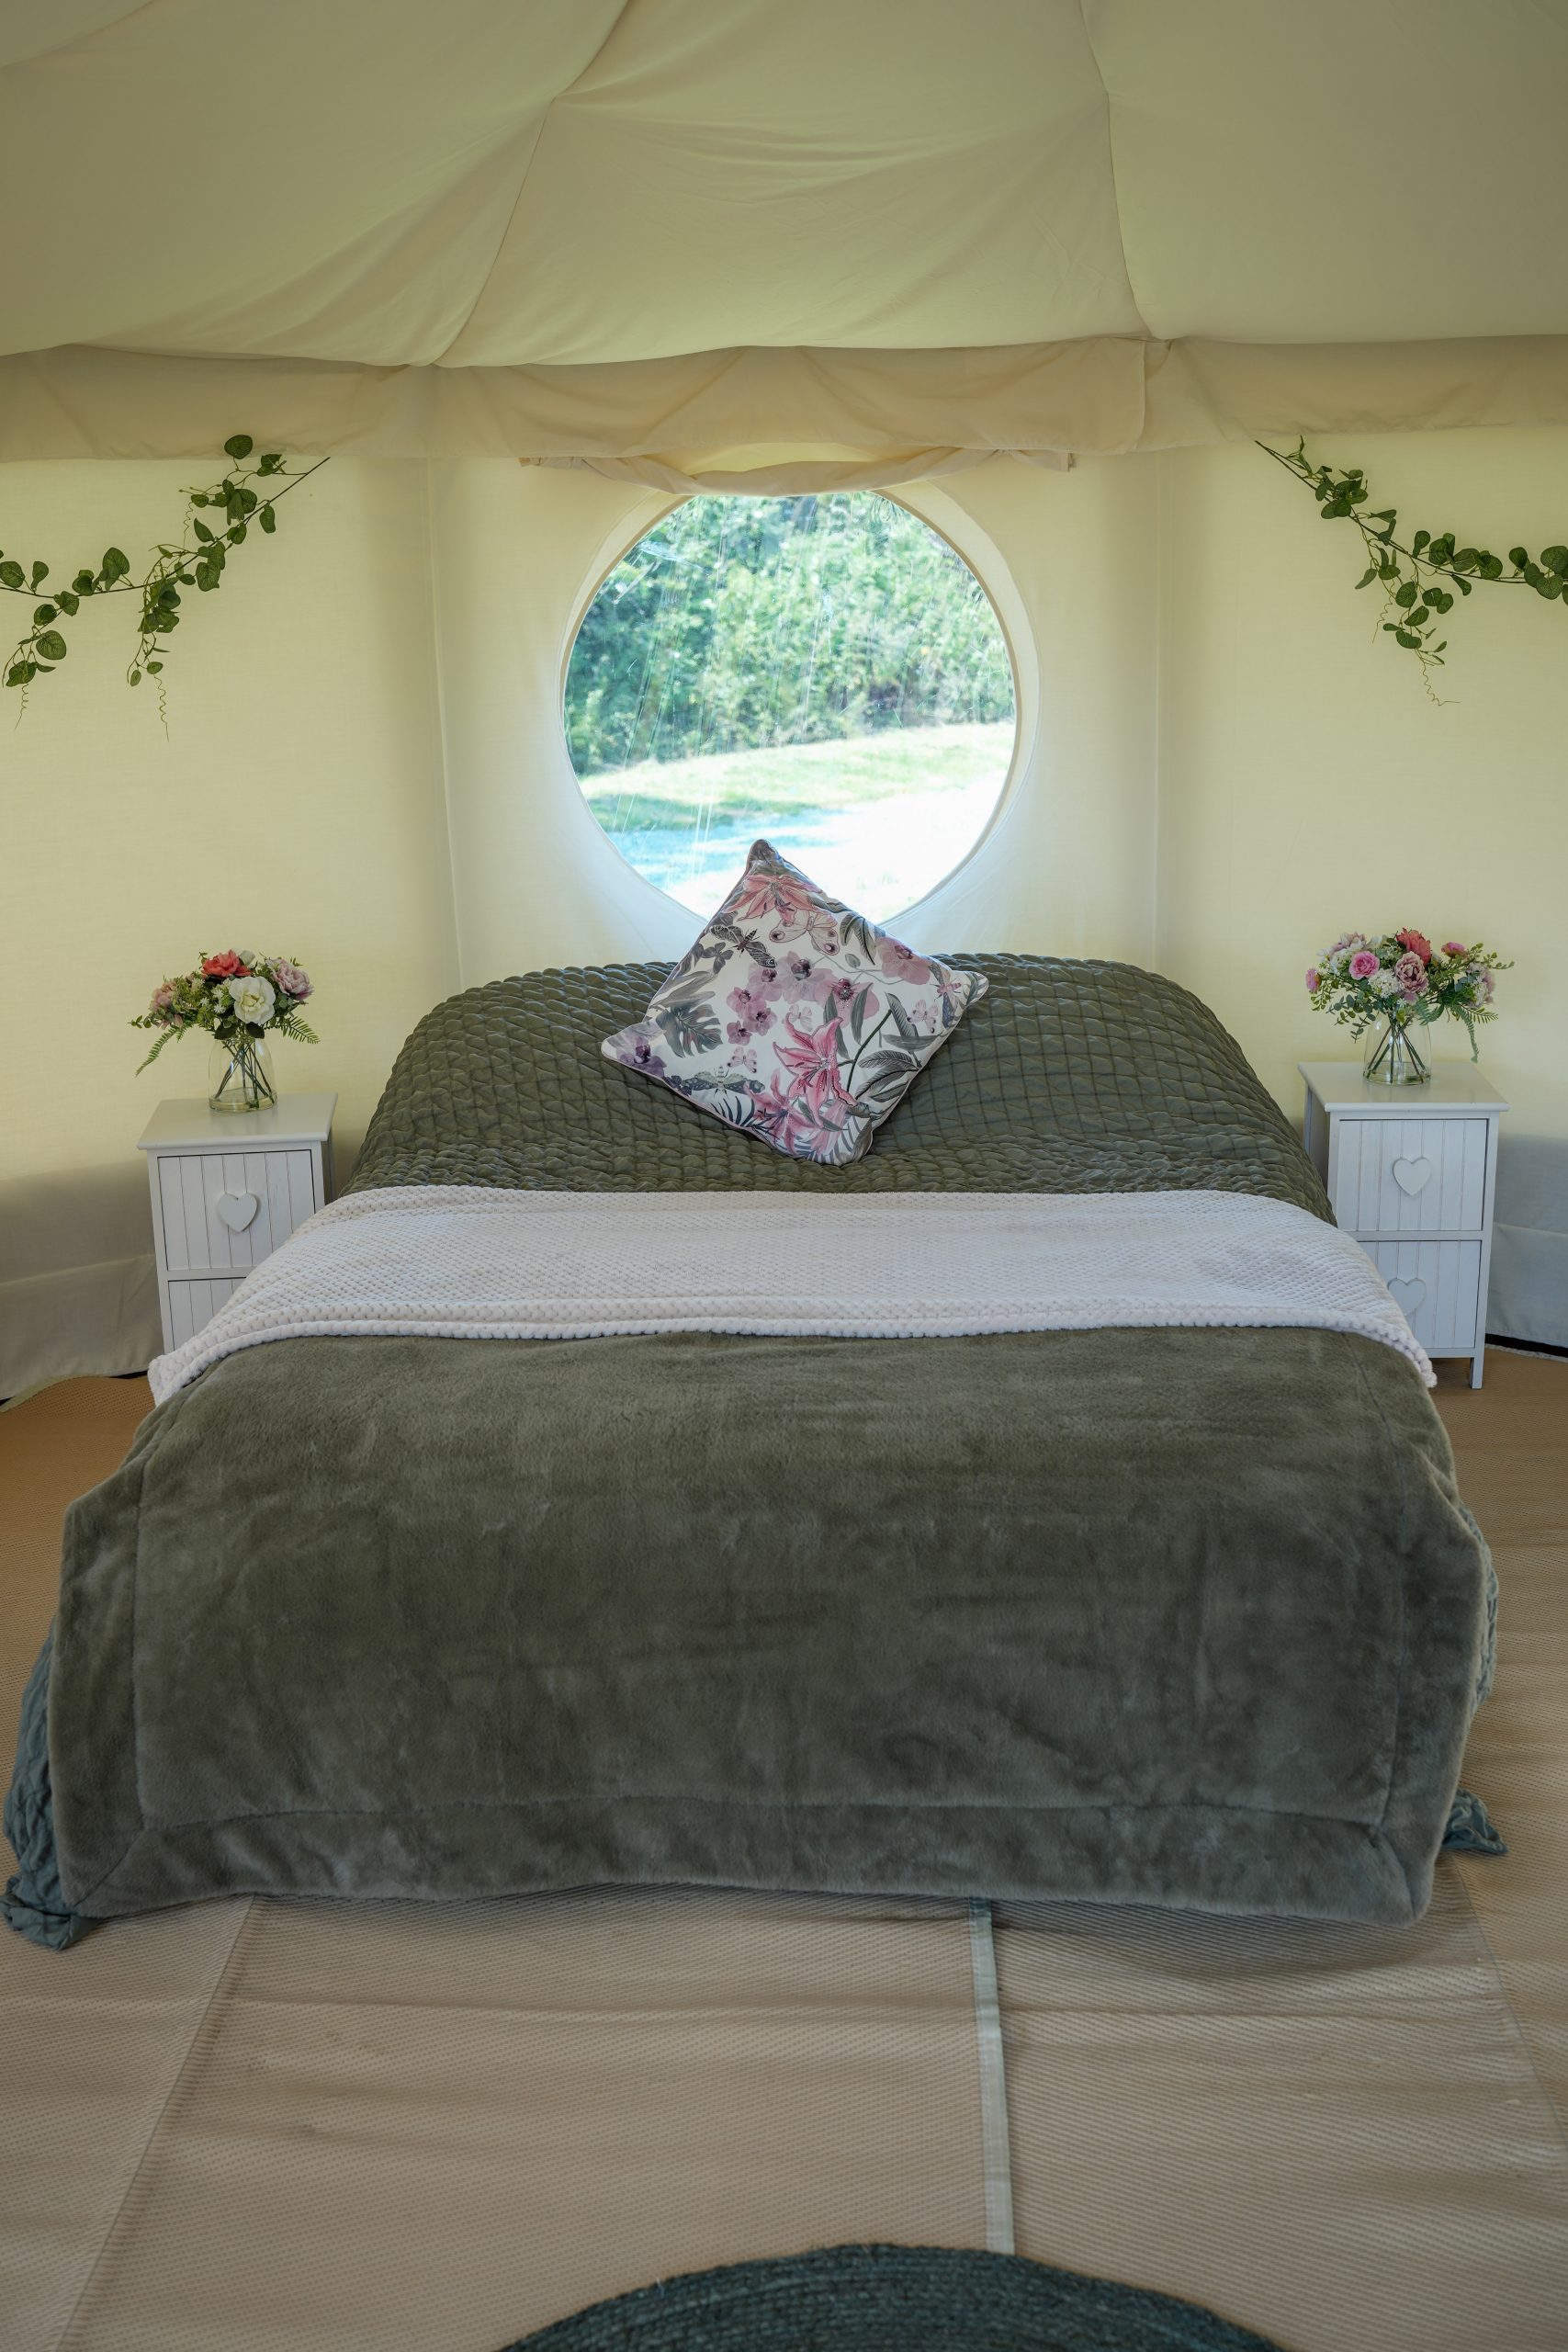 Pitch and Canvas | Glamping and Camping in Cheshire | Kopie tent interior